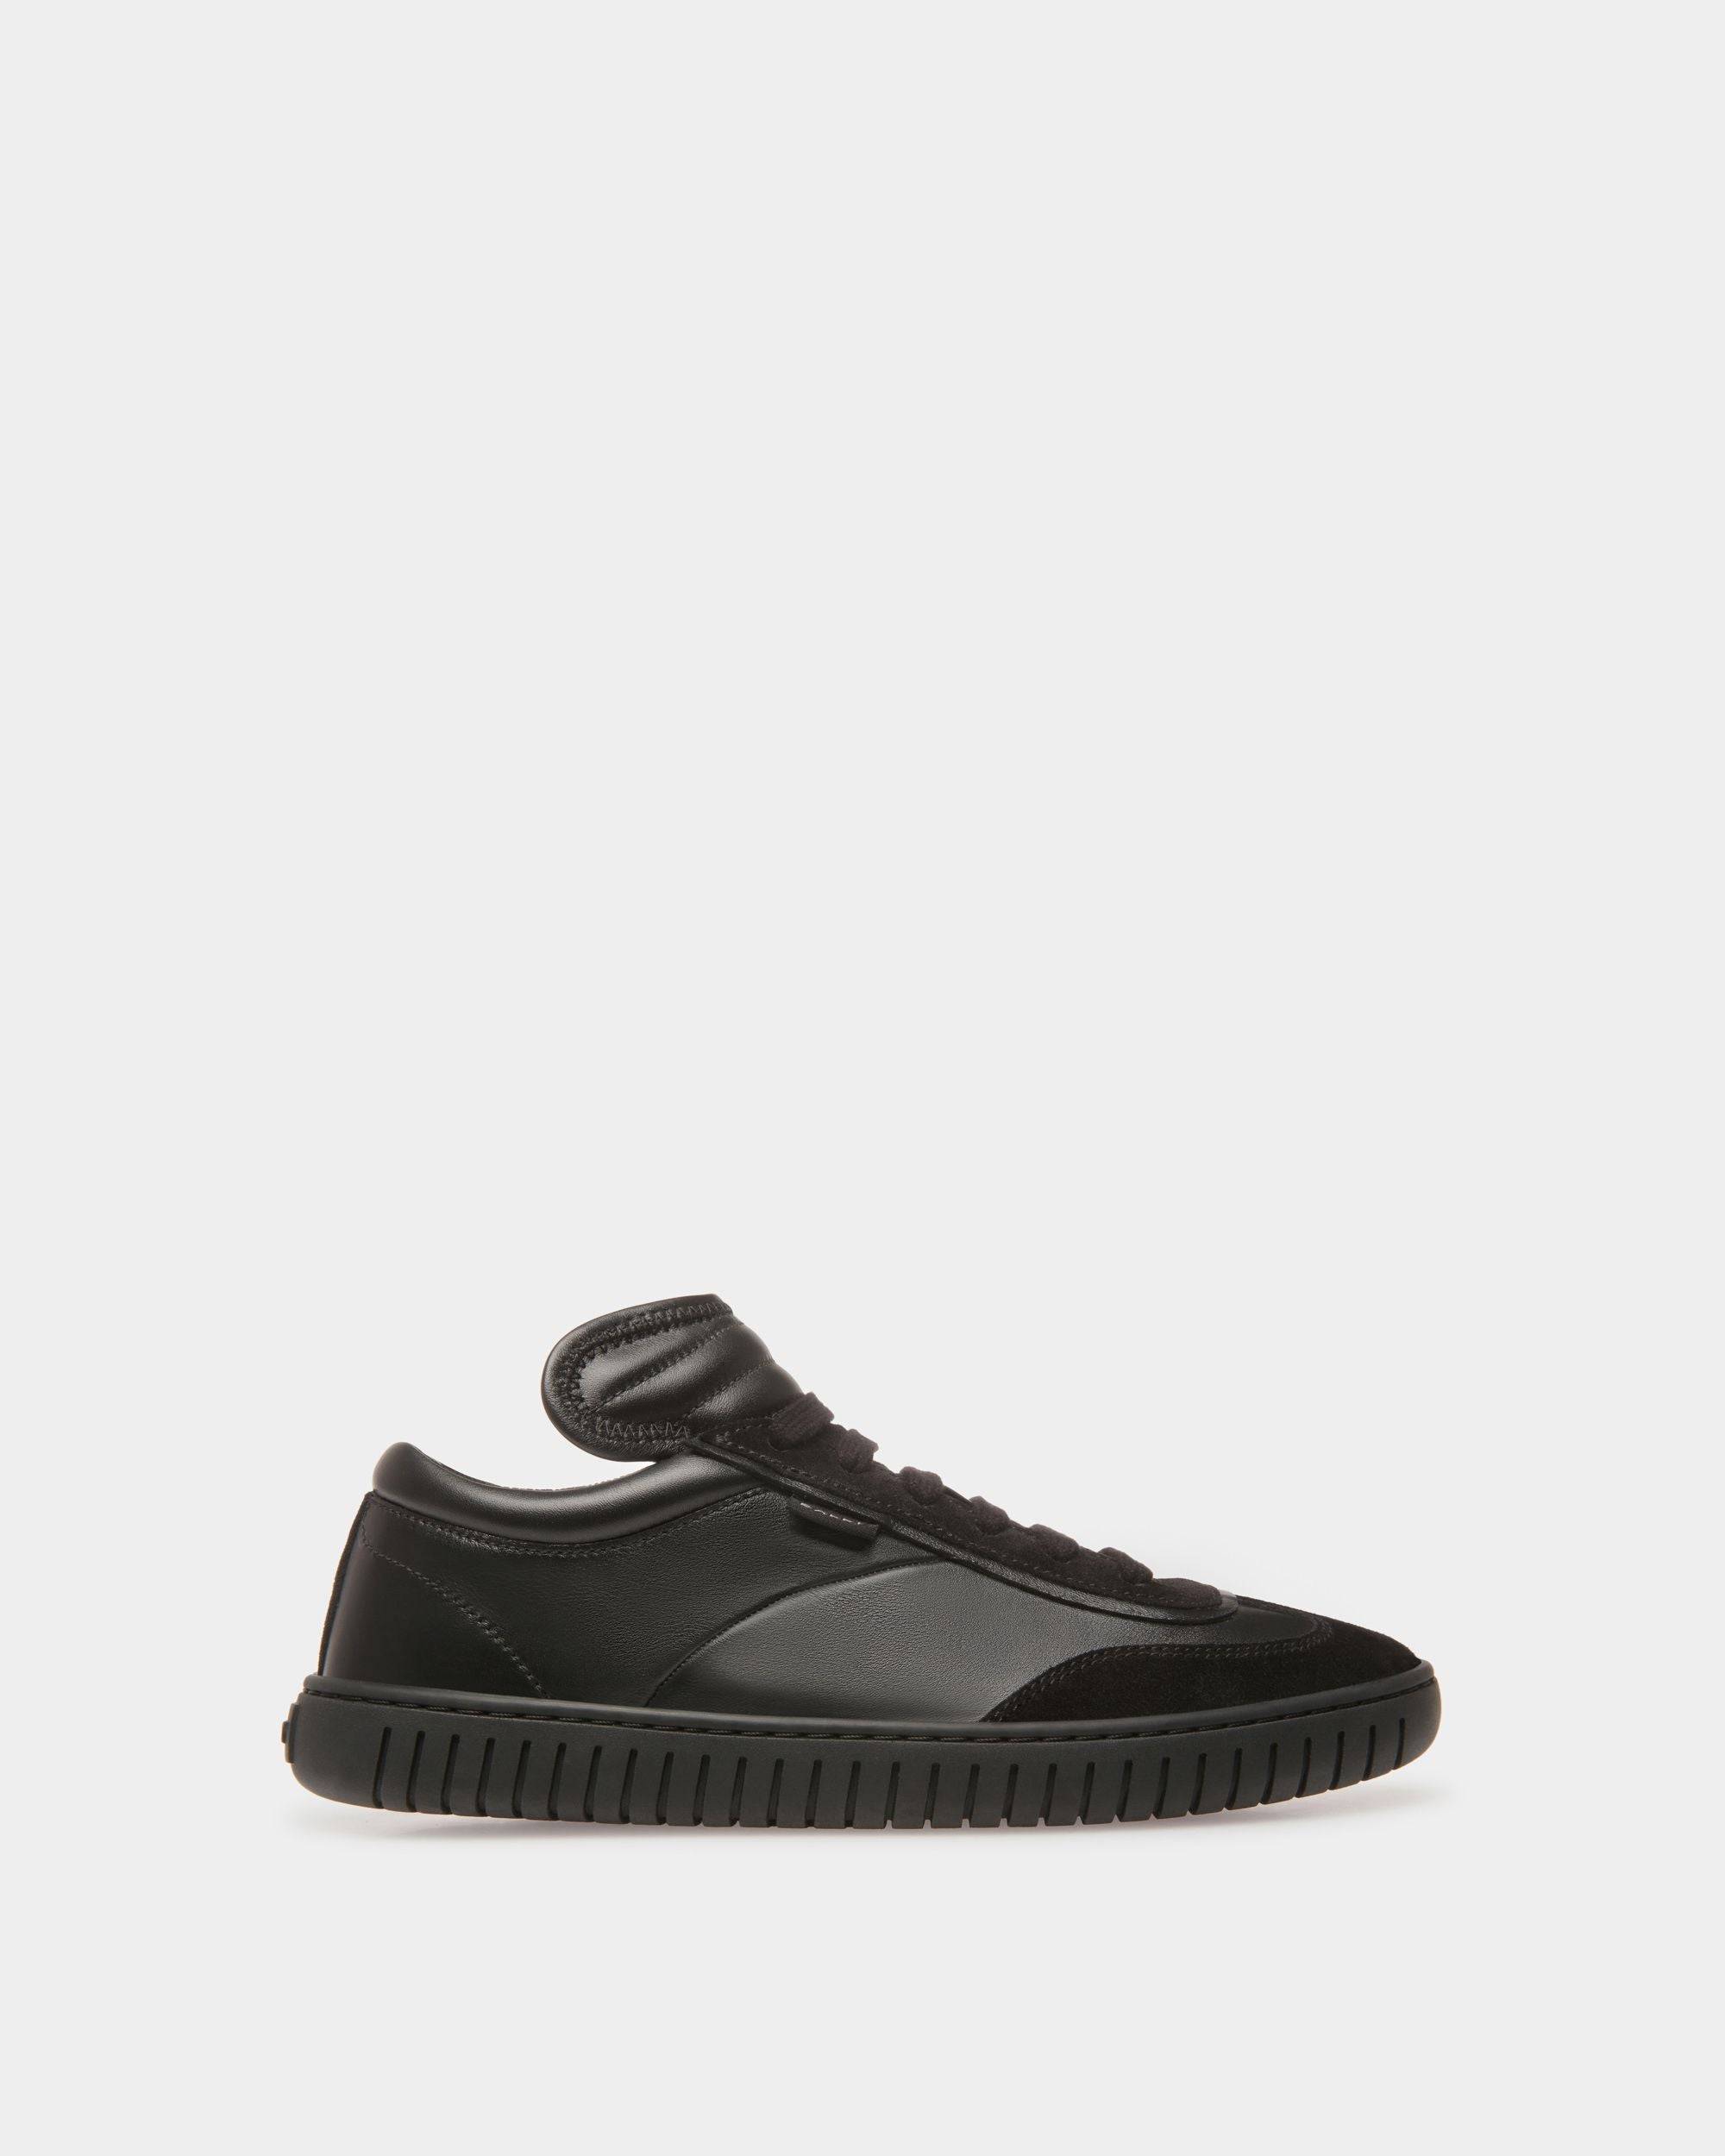 Women's Player Sneakers In Black Leather | Bally | Still Life Side